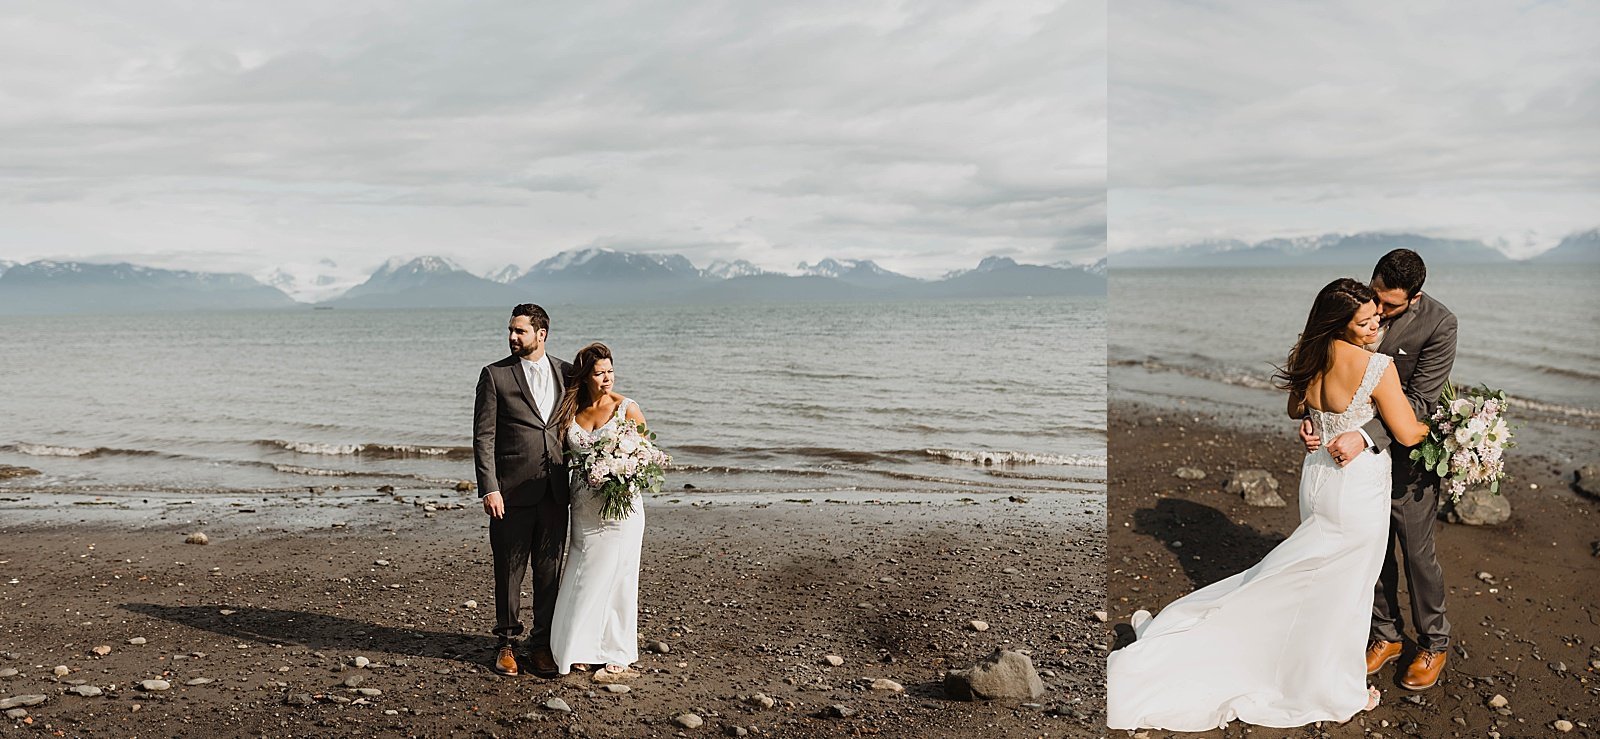  Newlyweds on the beachfront in Alaska with mountains in the background 